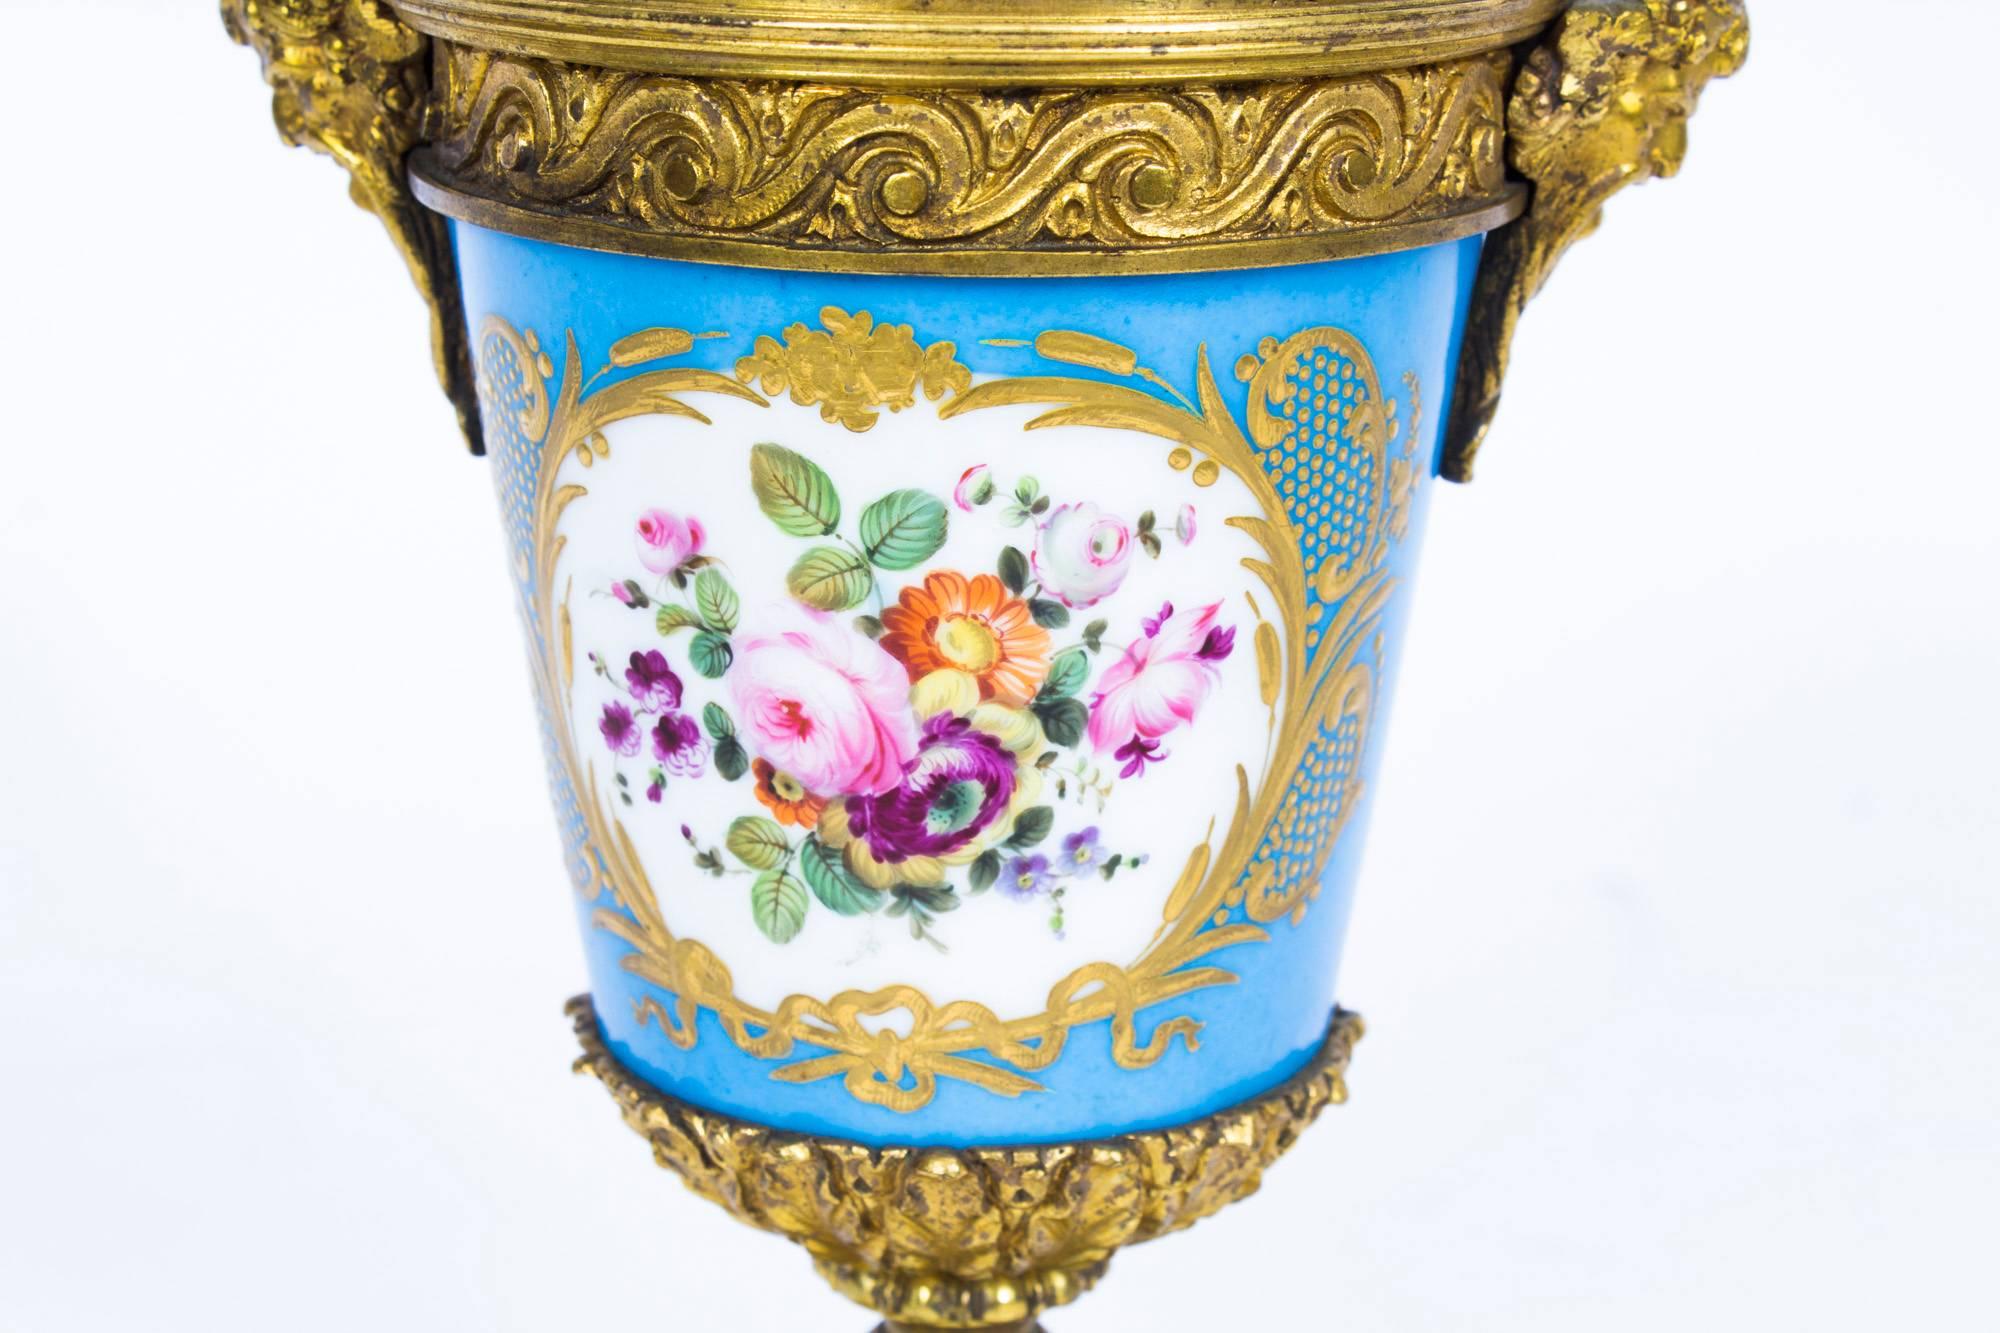 Louis XV 19th Century Pair of French Ormolu-Mounted Sèvres Lidded Urns Vases